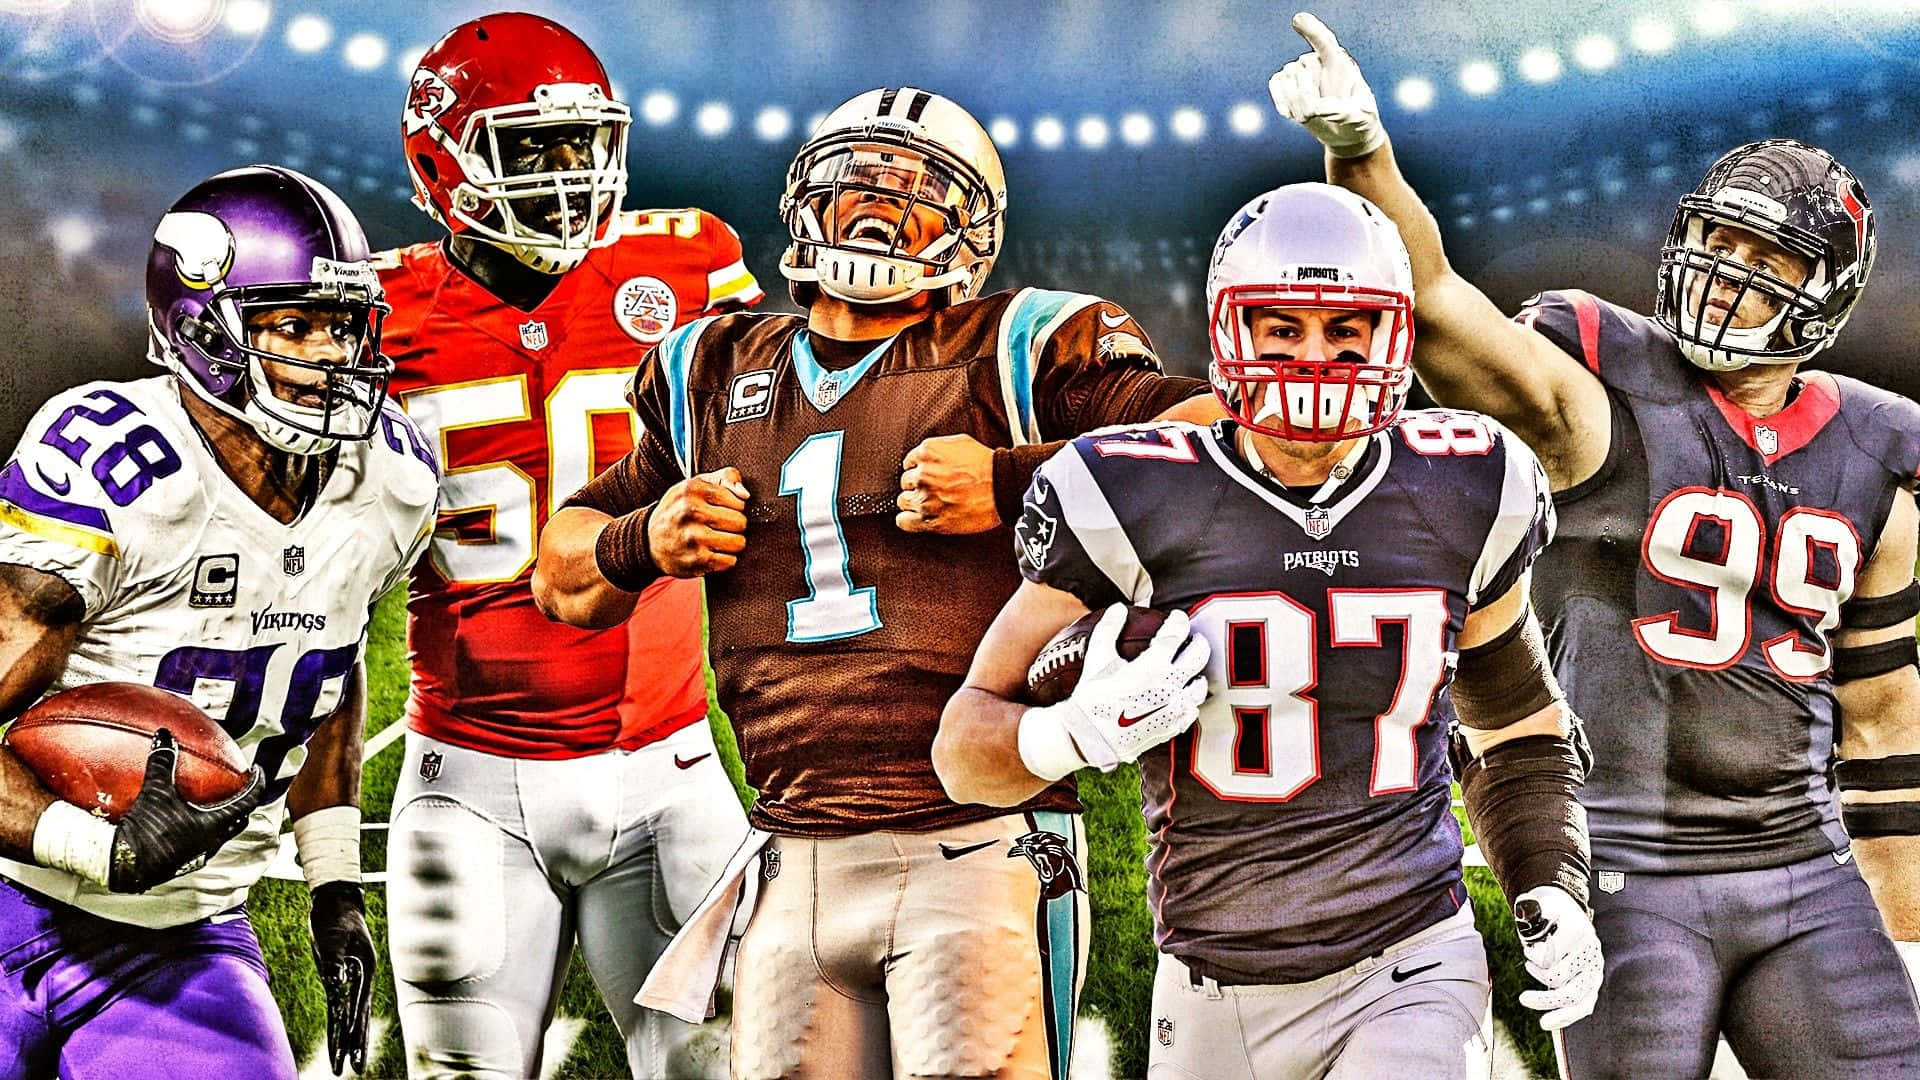 Electric Energy At Nfl Playoffs Wallpaper